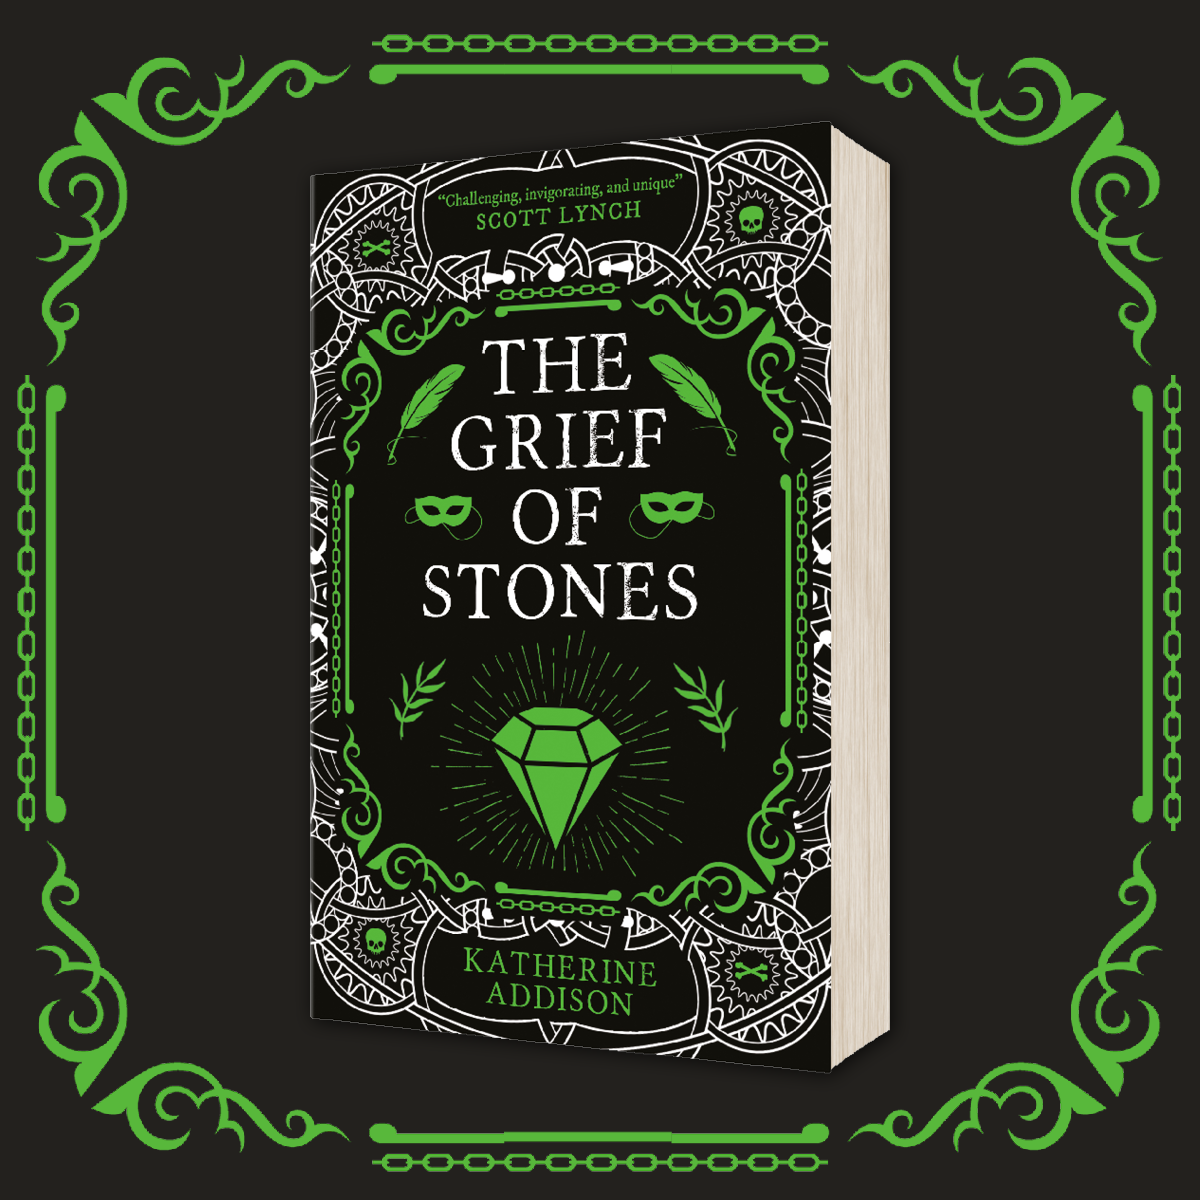 OUT NOW: The Grief of Stones by Katherine Addision!